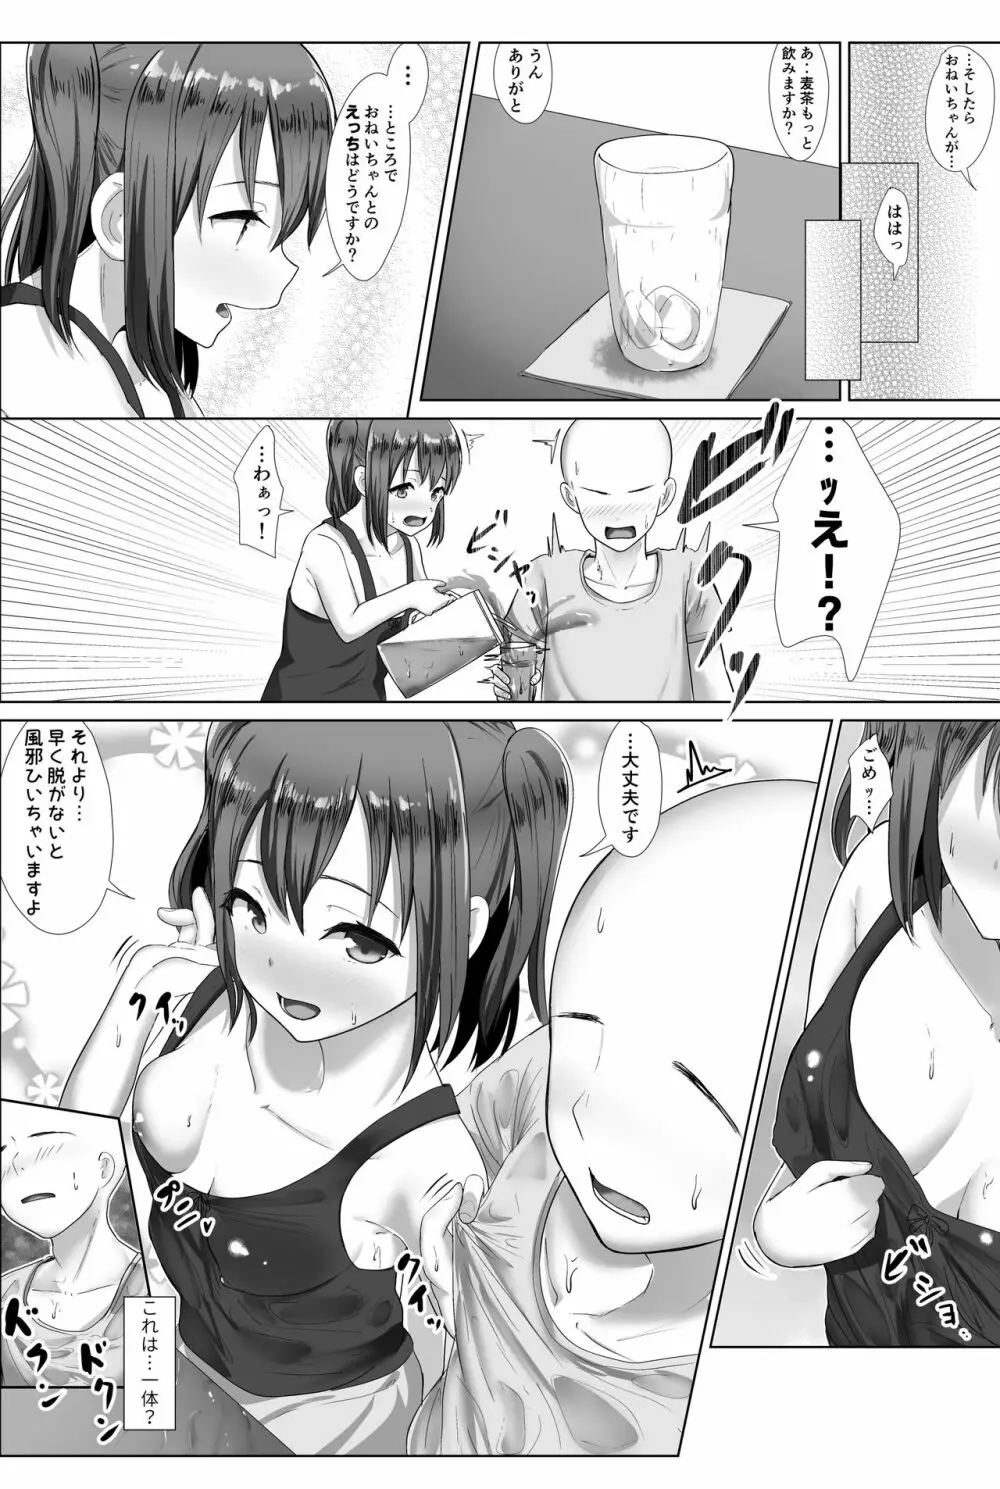 e-rn fanbox short love live doujinshi collection - page41